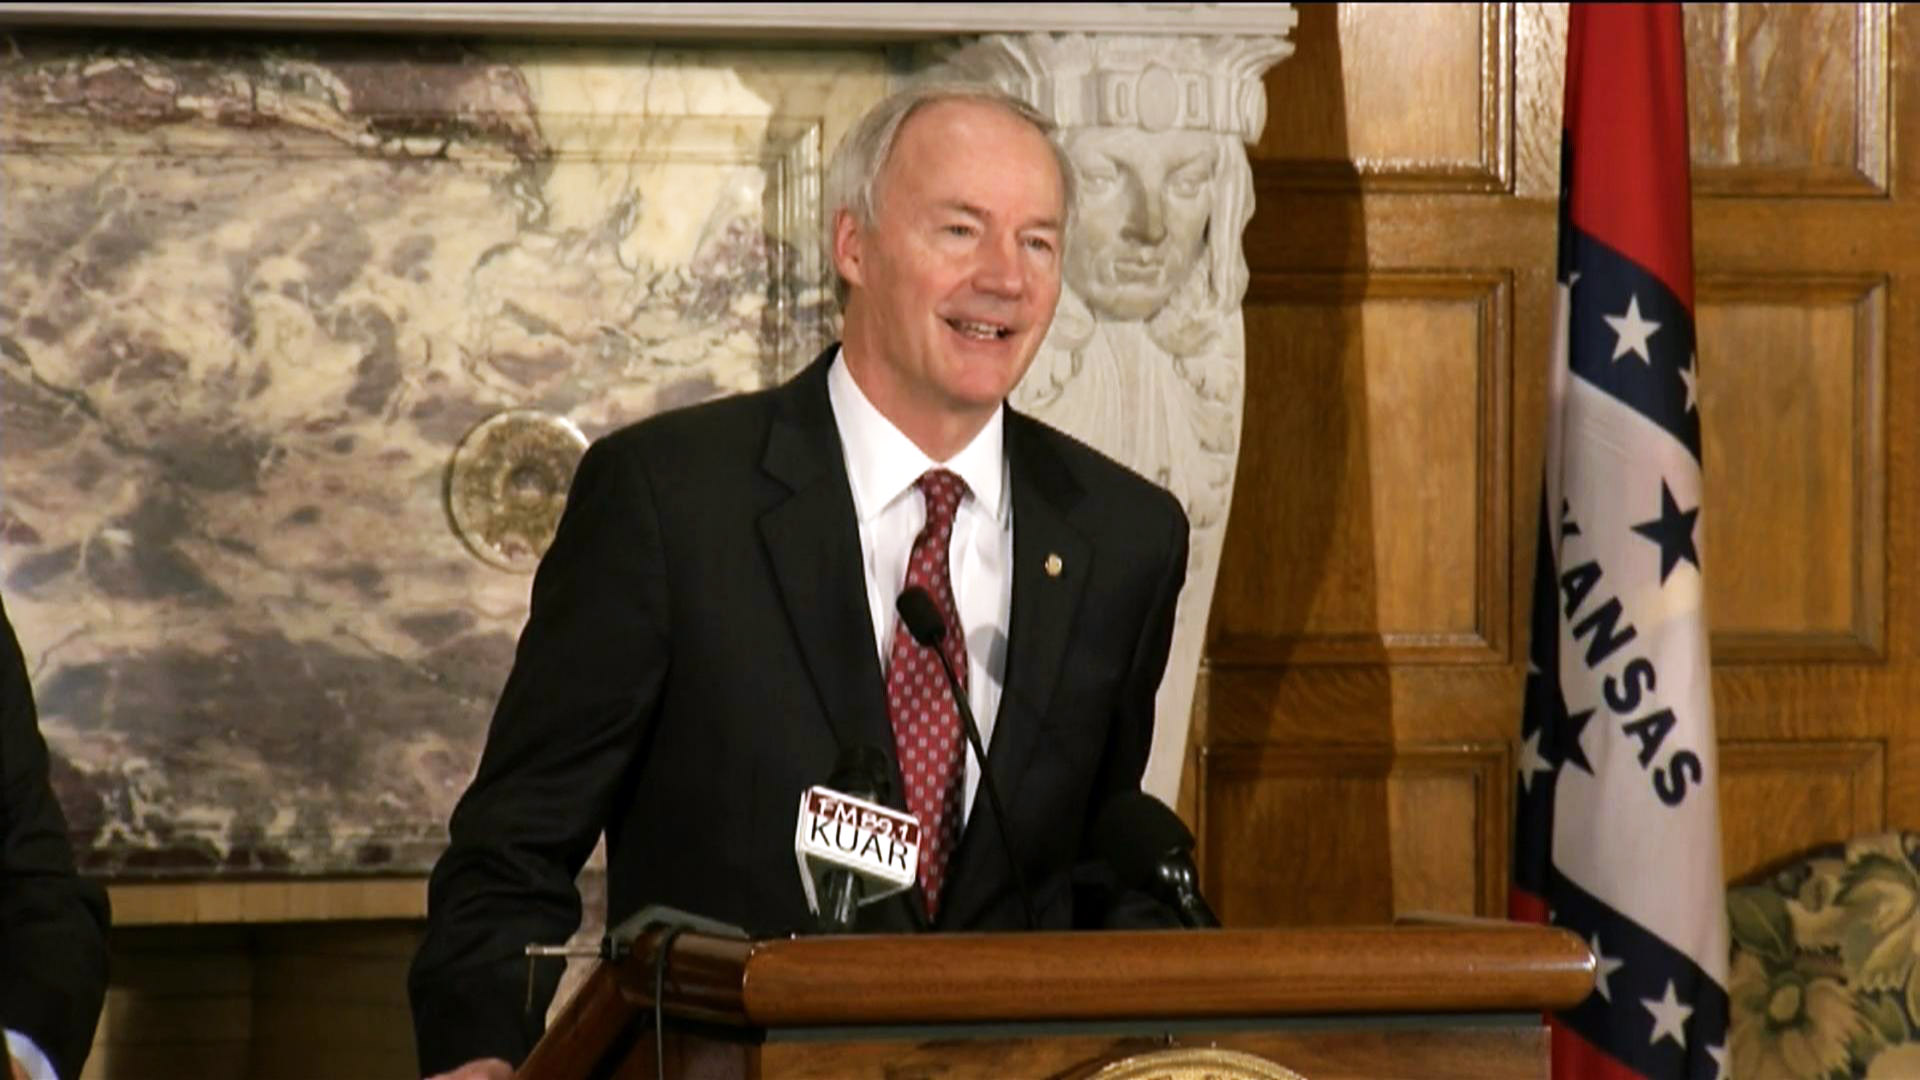 Arkansas governor Asa Hutchinson calls for changes to religious freedom